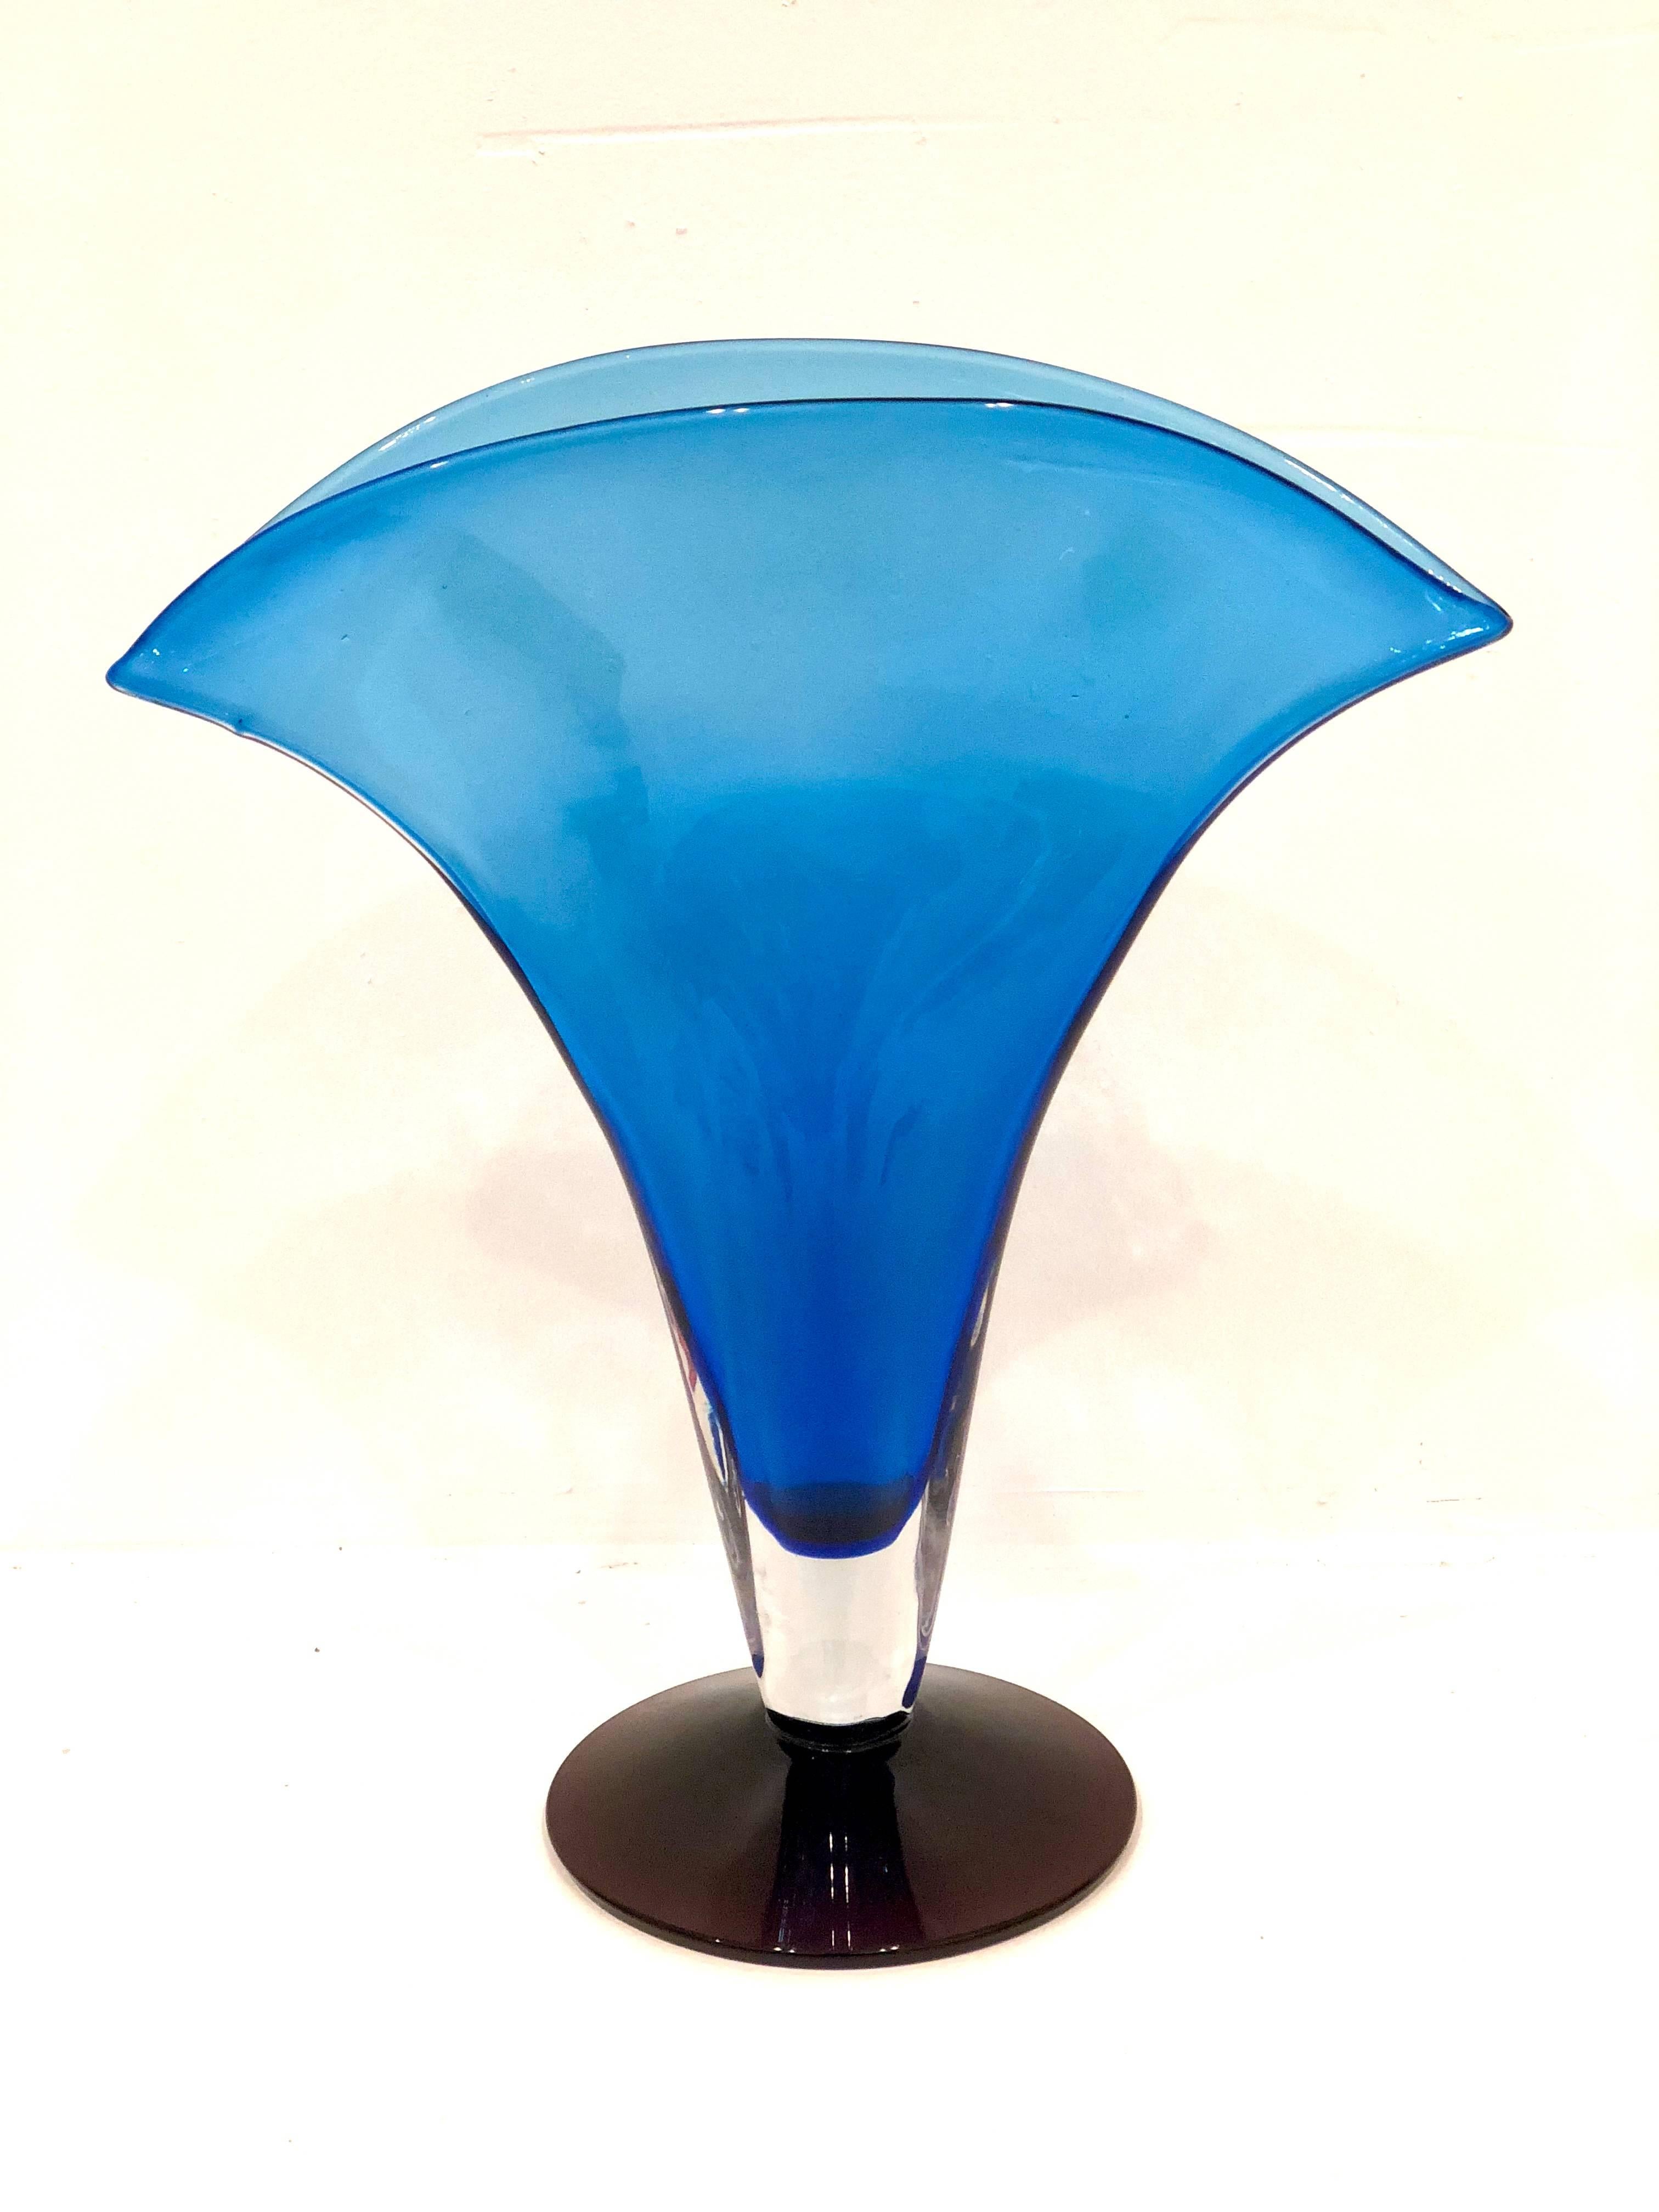 Elegant and colorful fan vase with fanned out top and contrasting colored foot by Walter J. Blenko Jr. Signature 1993. Model #872.